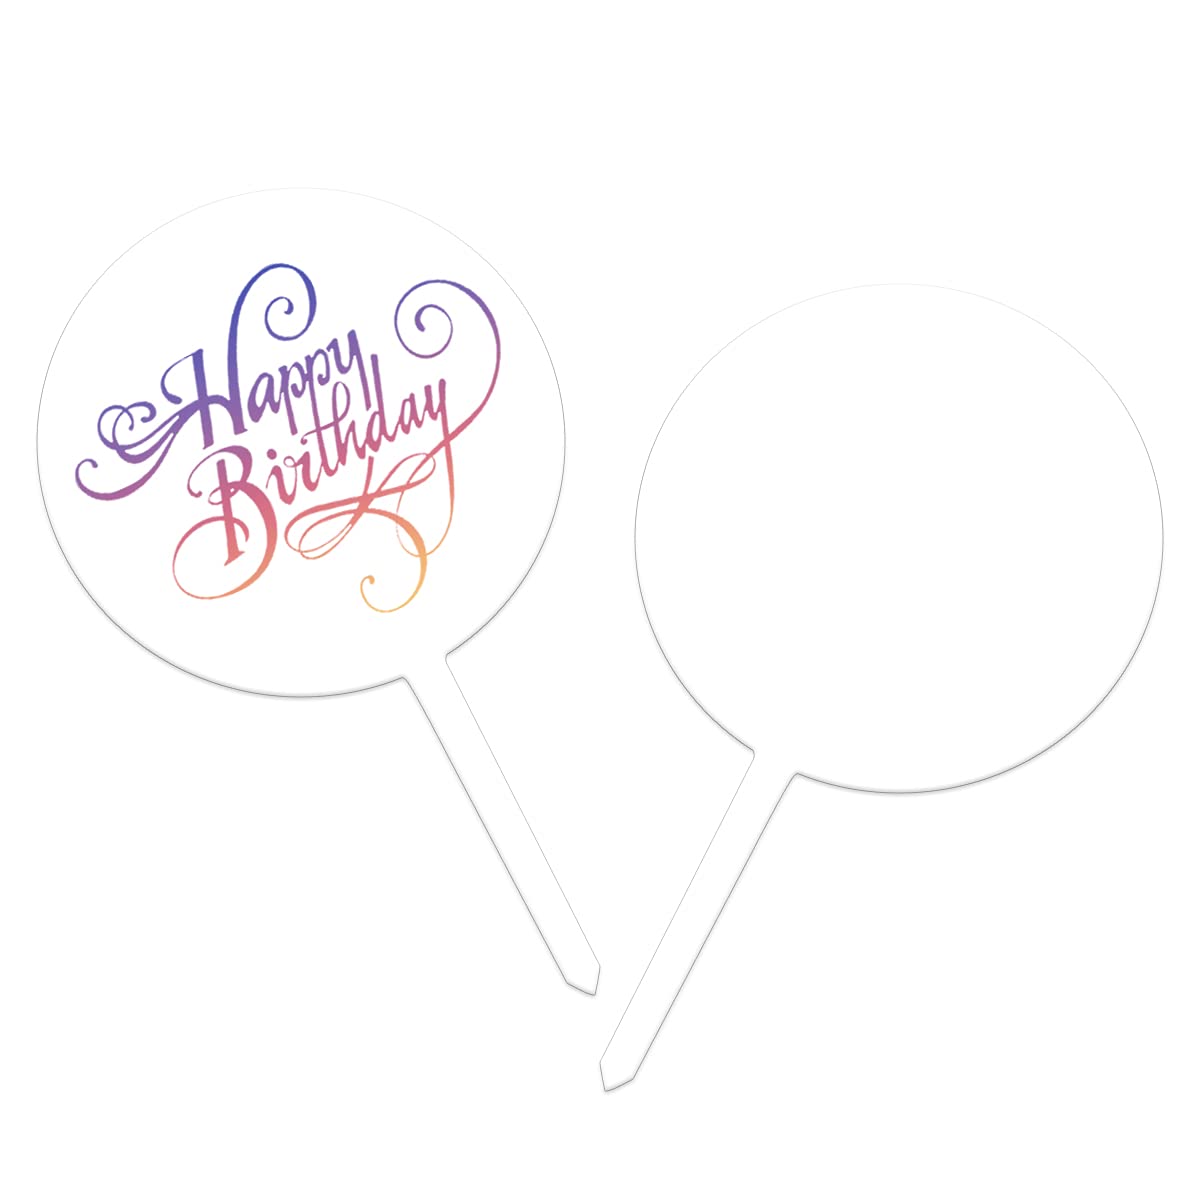 Printable Cake Toppers for Birthdays (+ Free SVG Templates!)